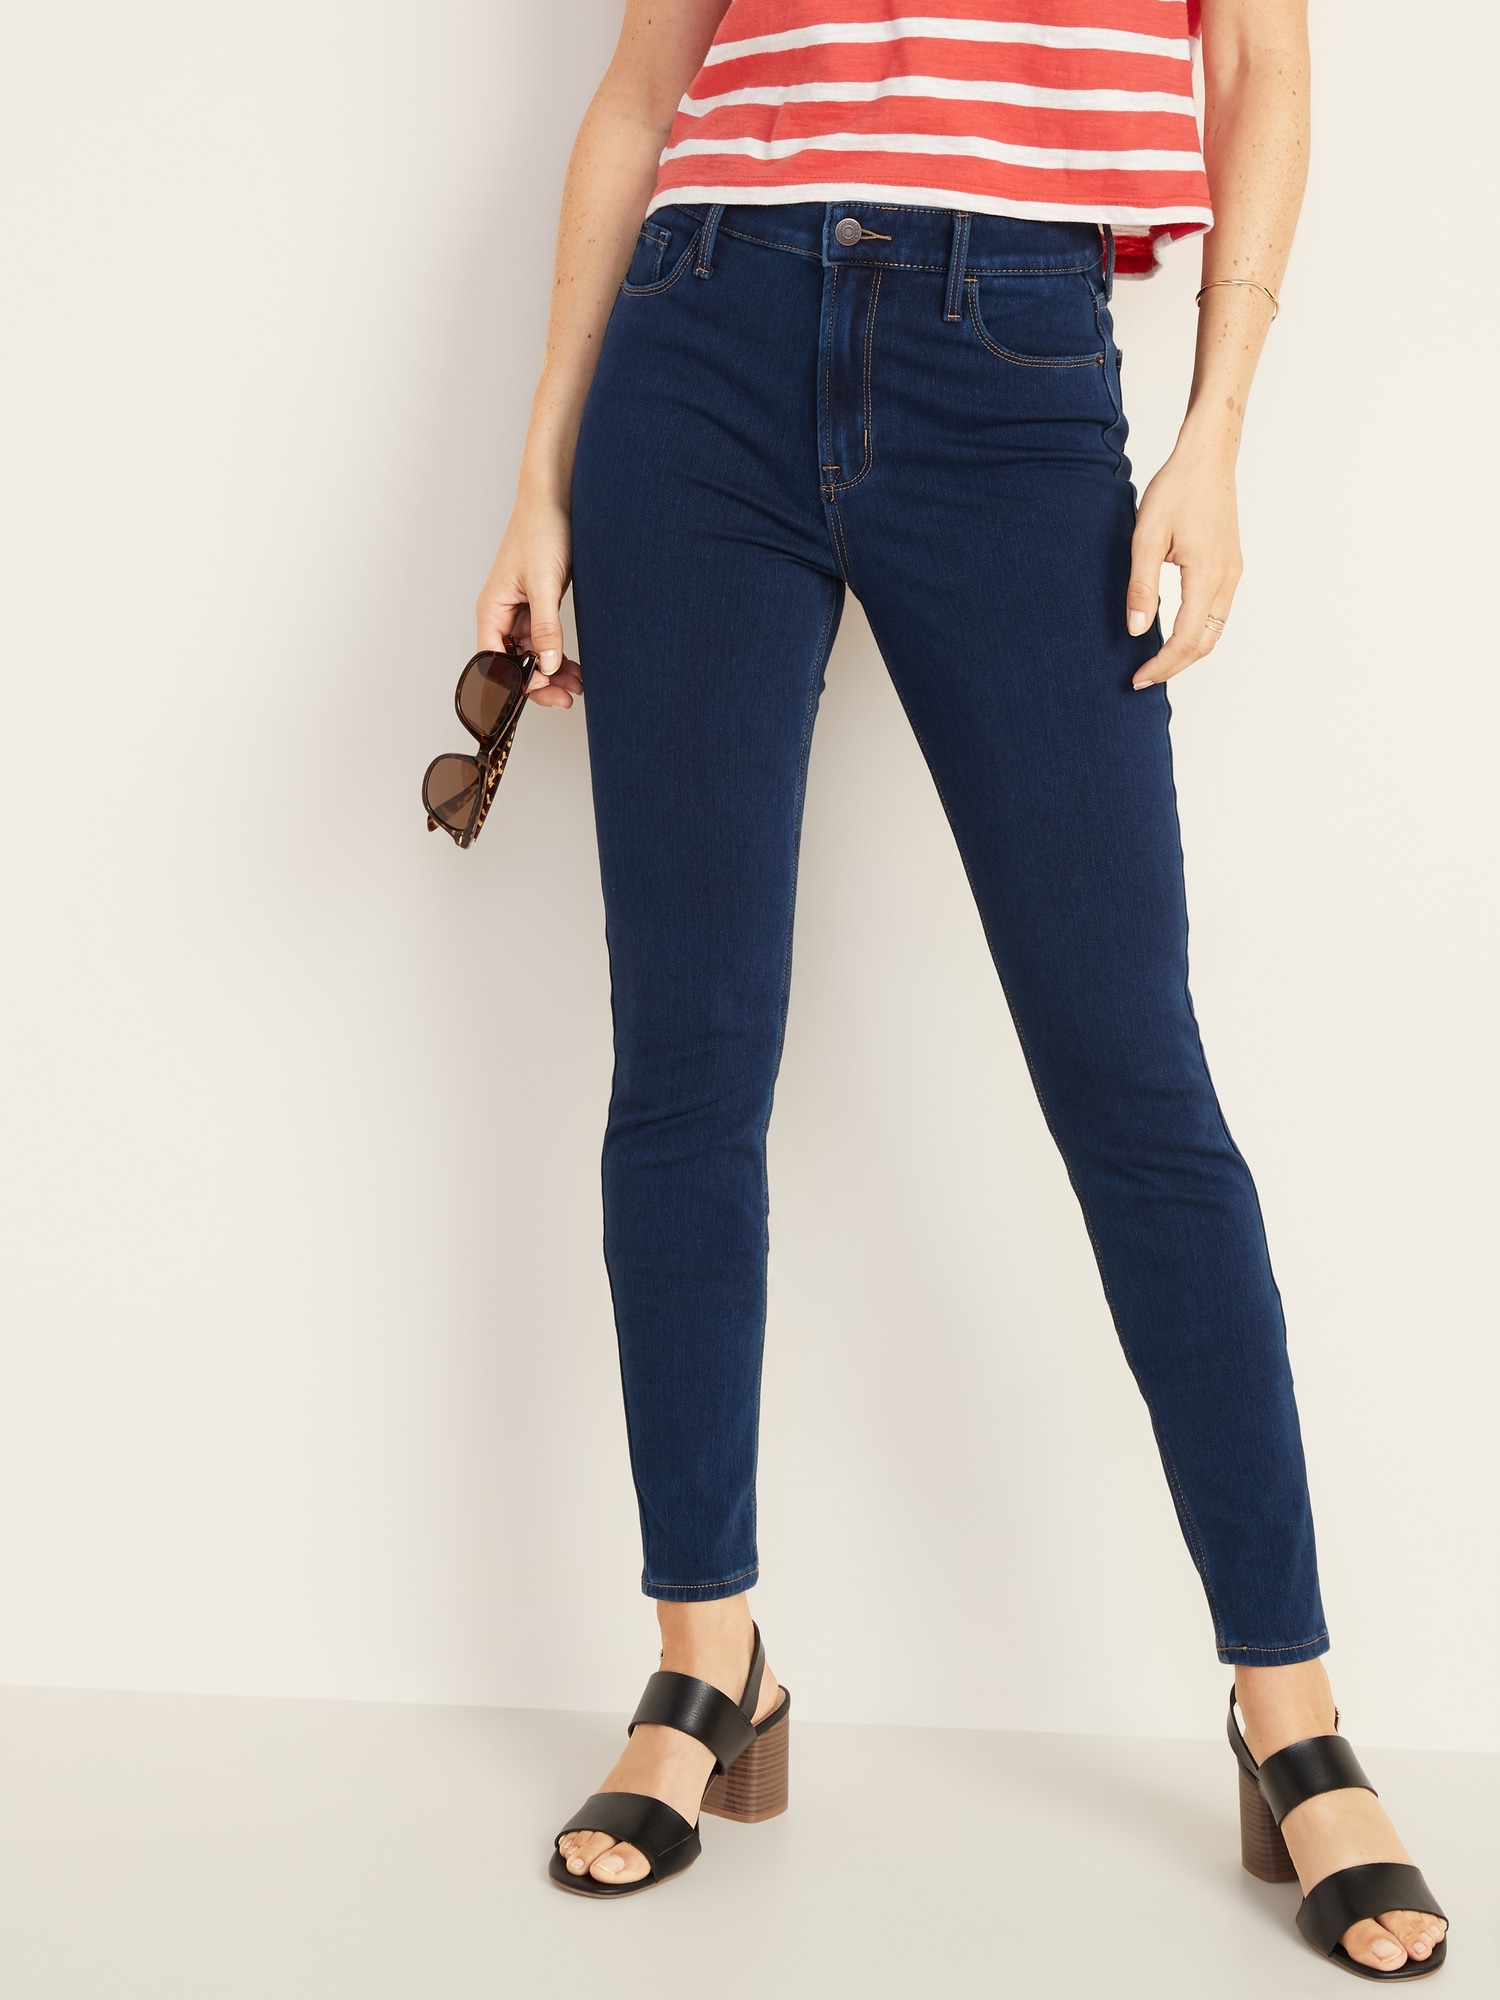 old navy winter jeans